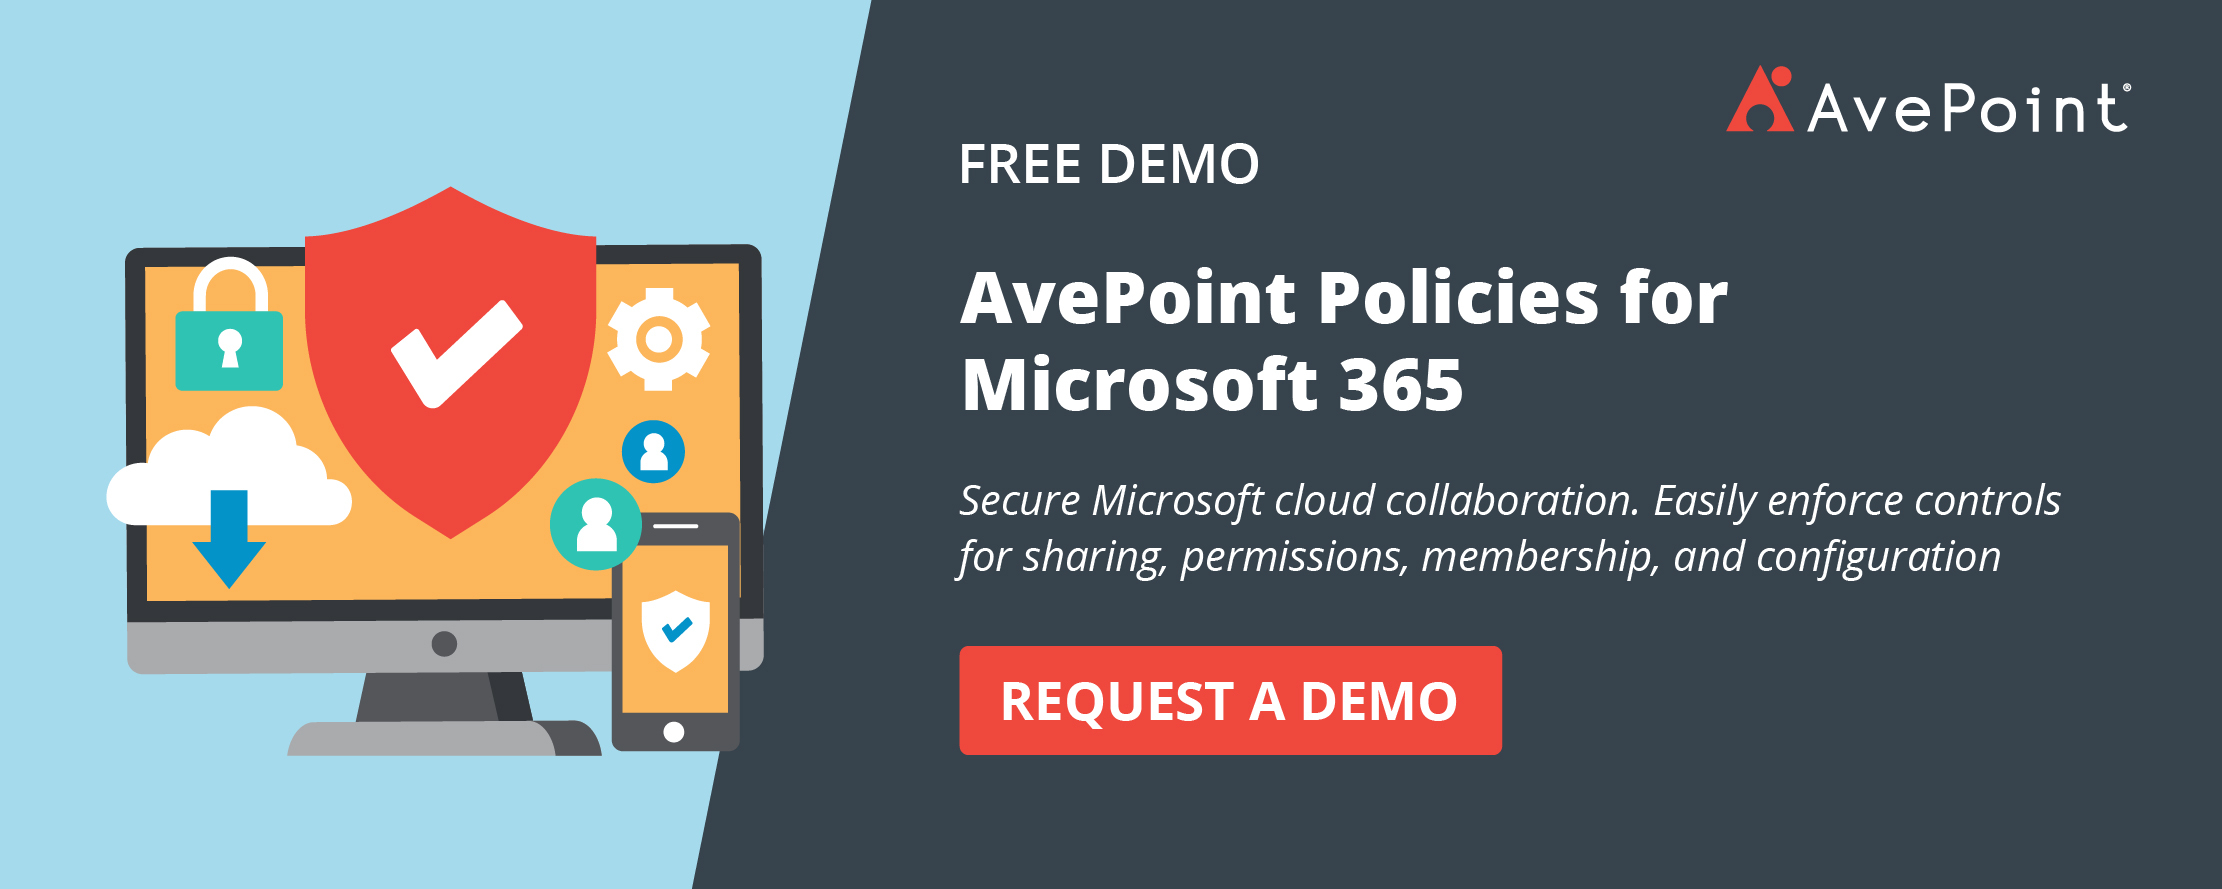 AvePoint Policies Request a Demo